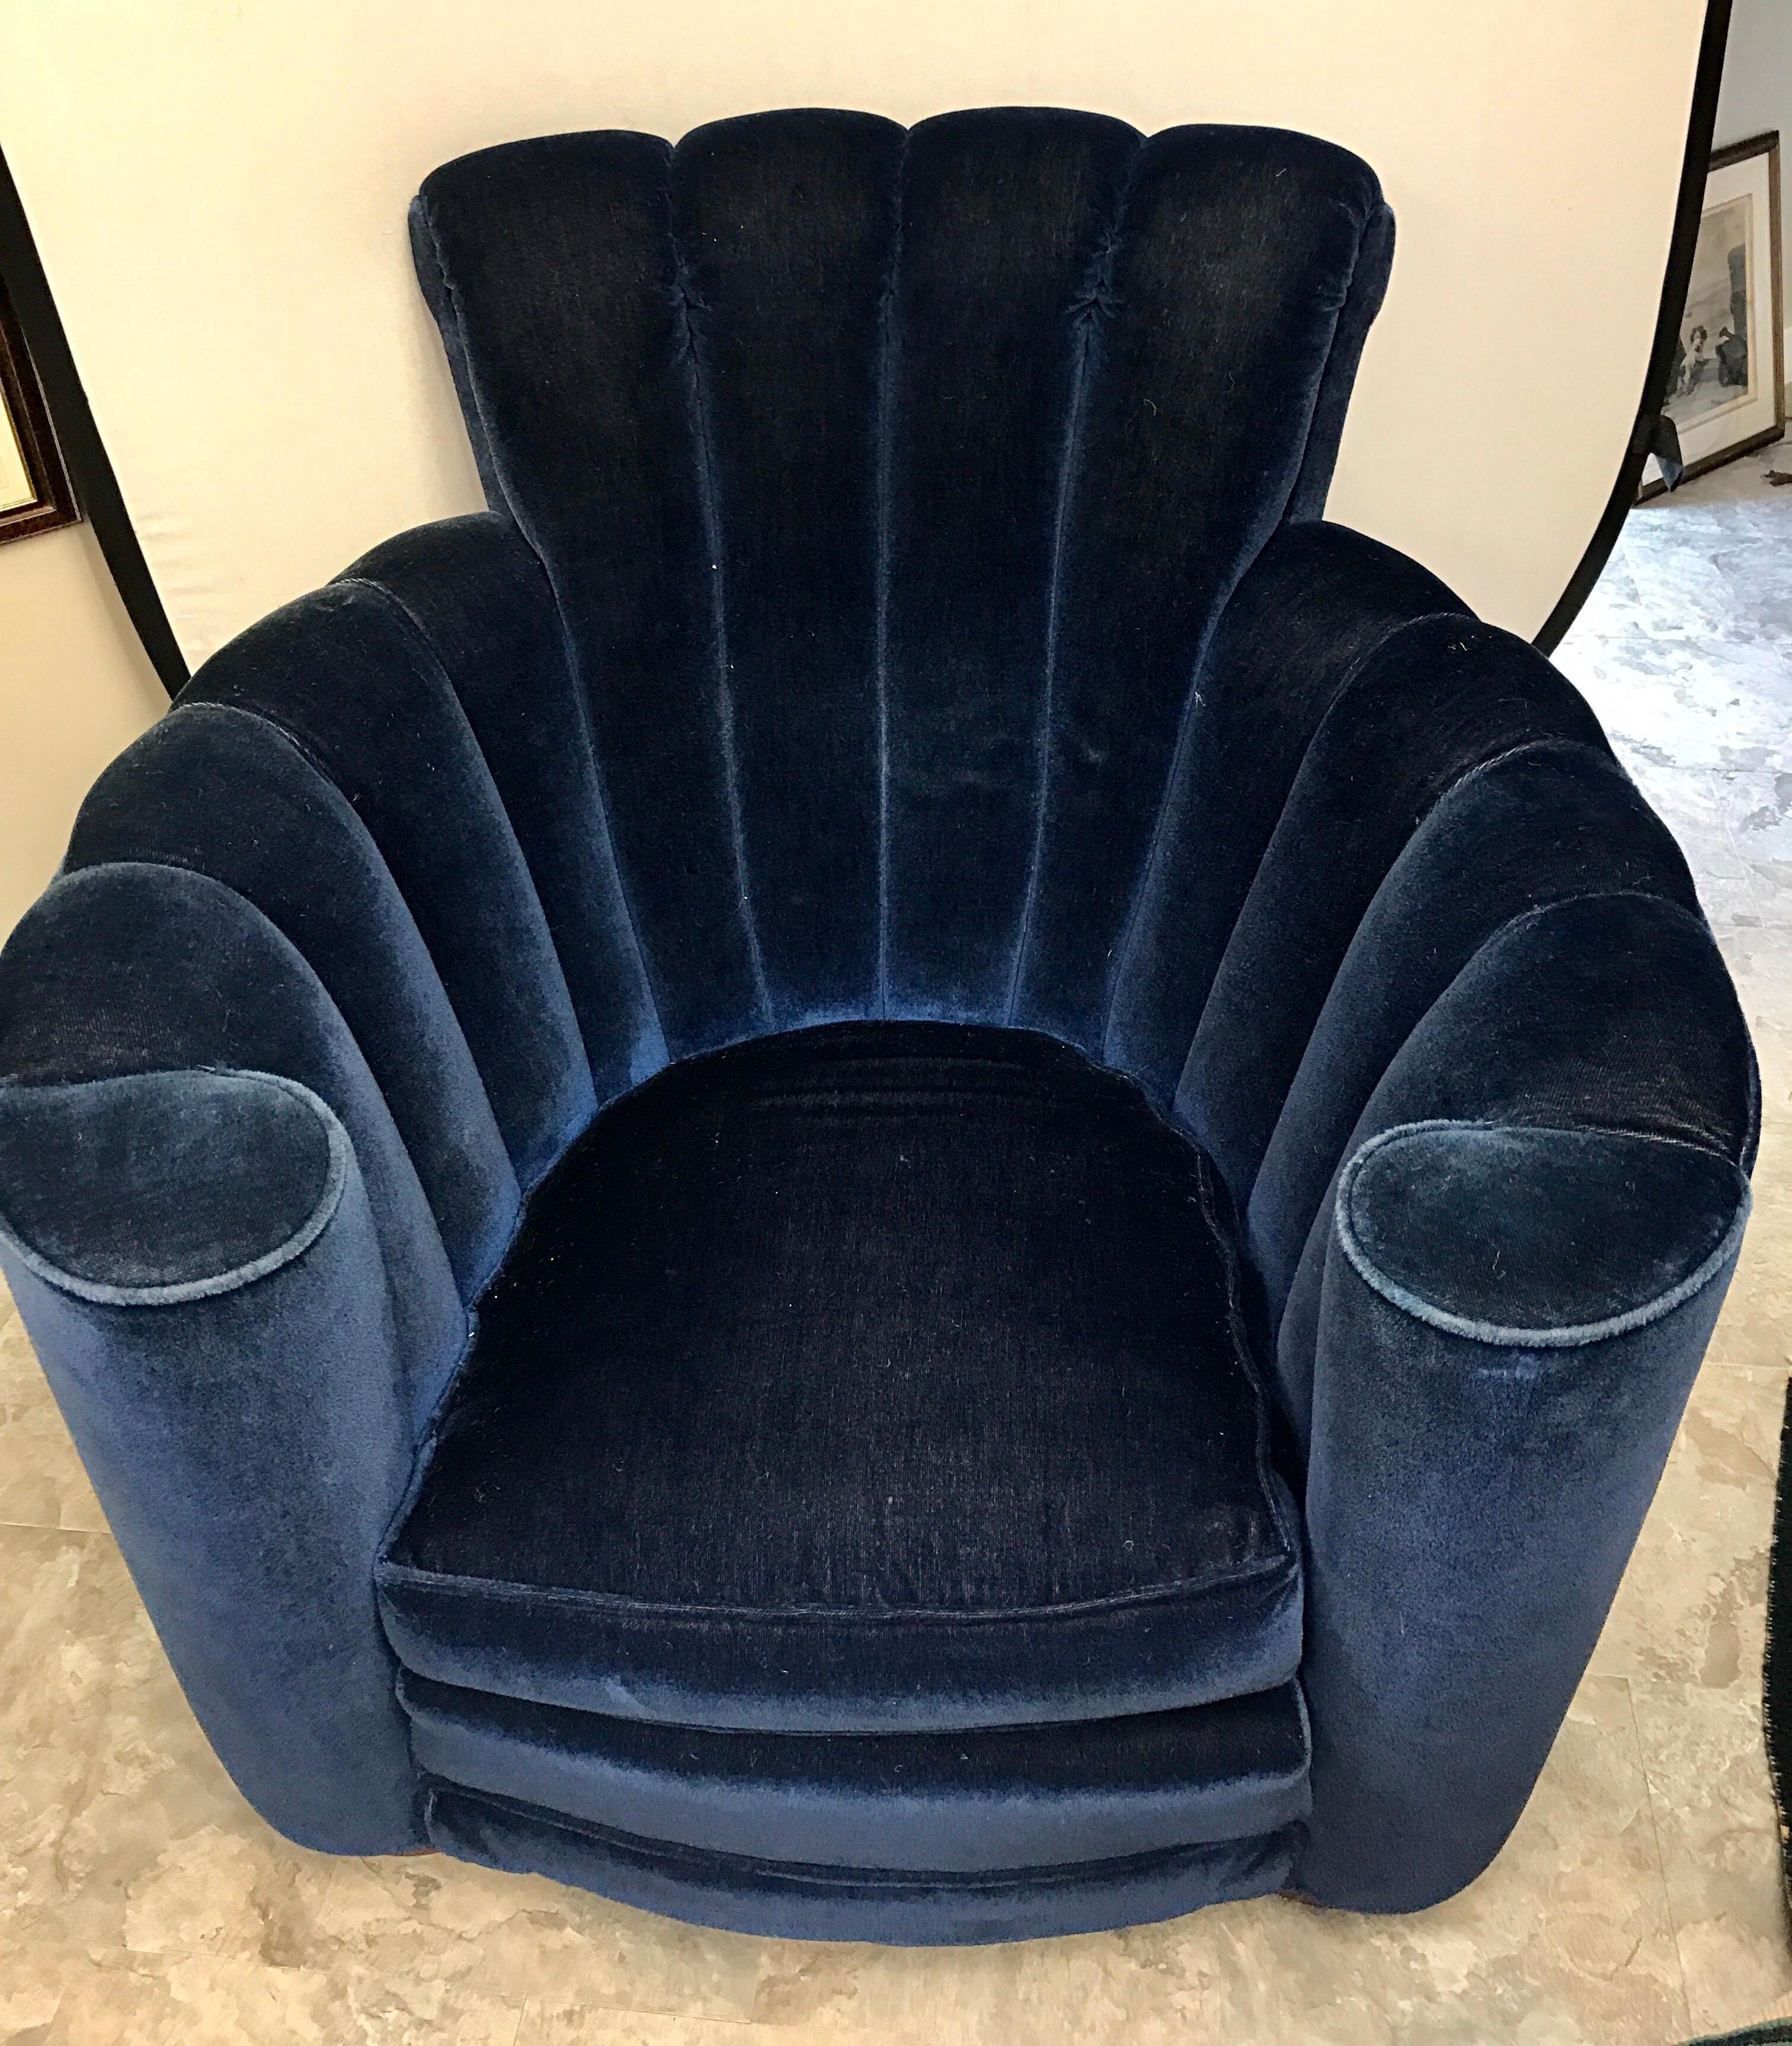 Large curved scalloped Art Deco armchair. Upholstery is blue mohair velvet and is original to the chair which dates to the 1970s.